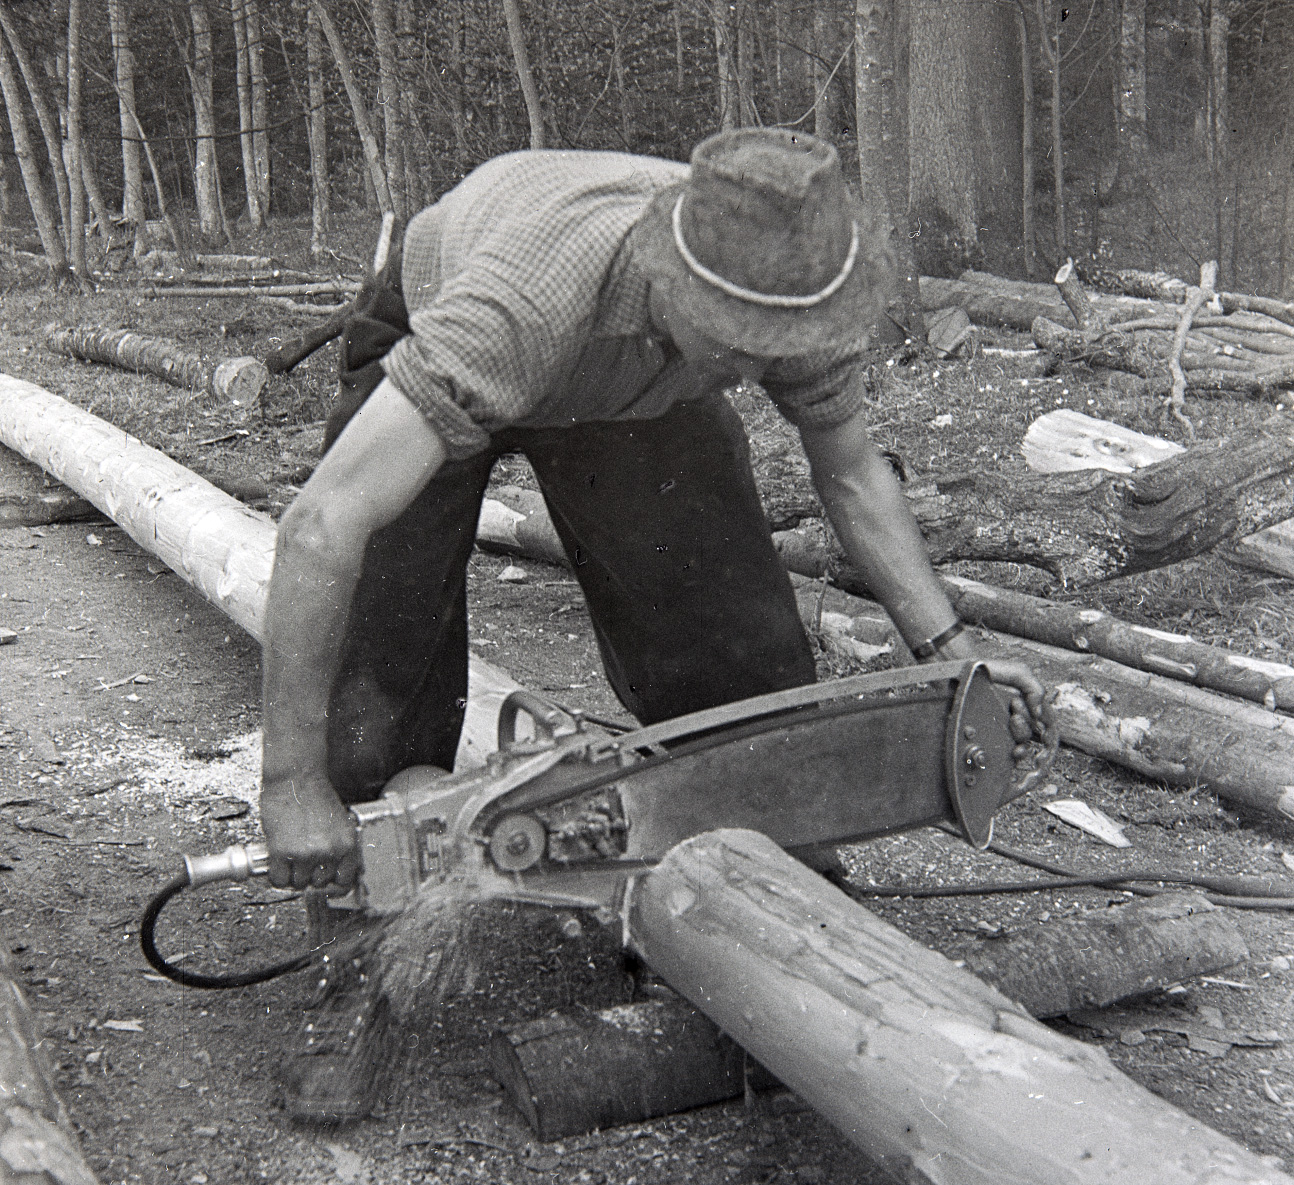 The History of the Chainsaw